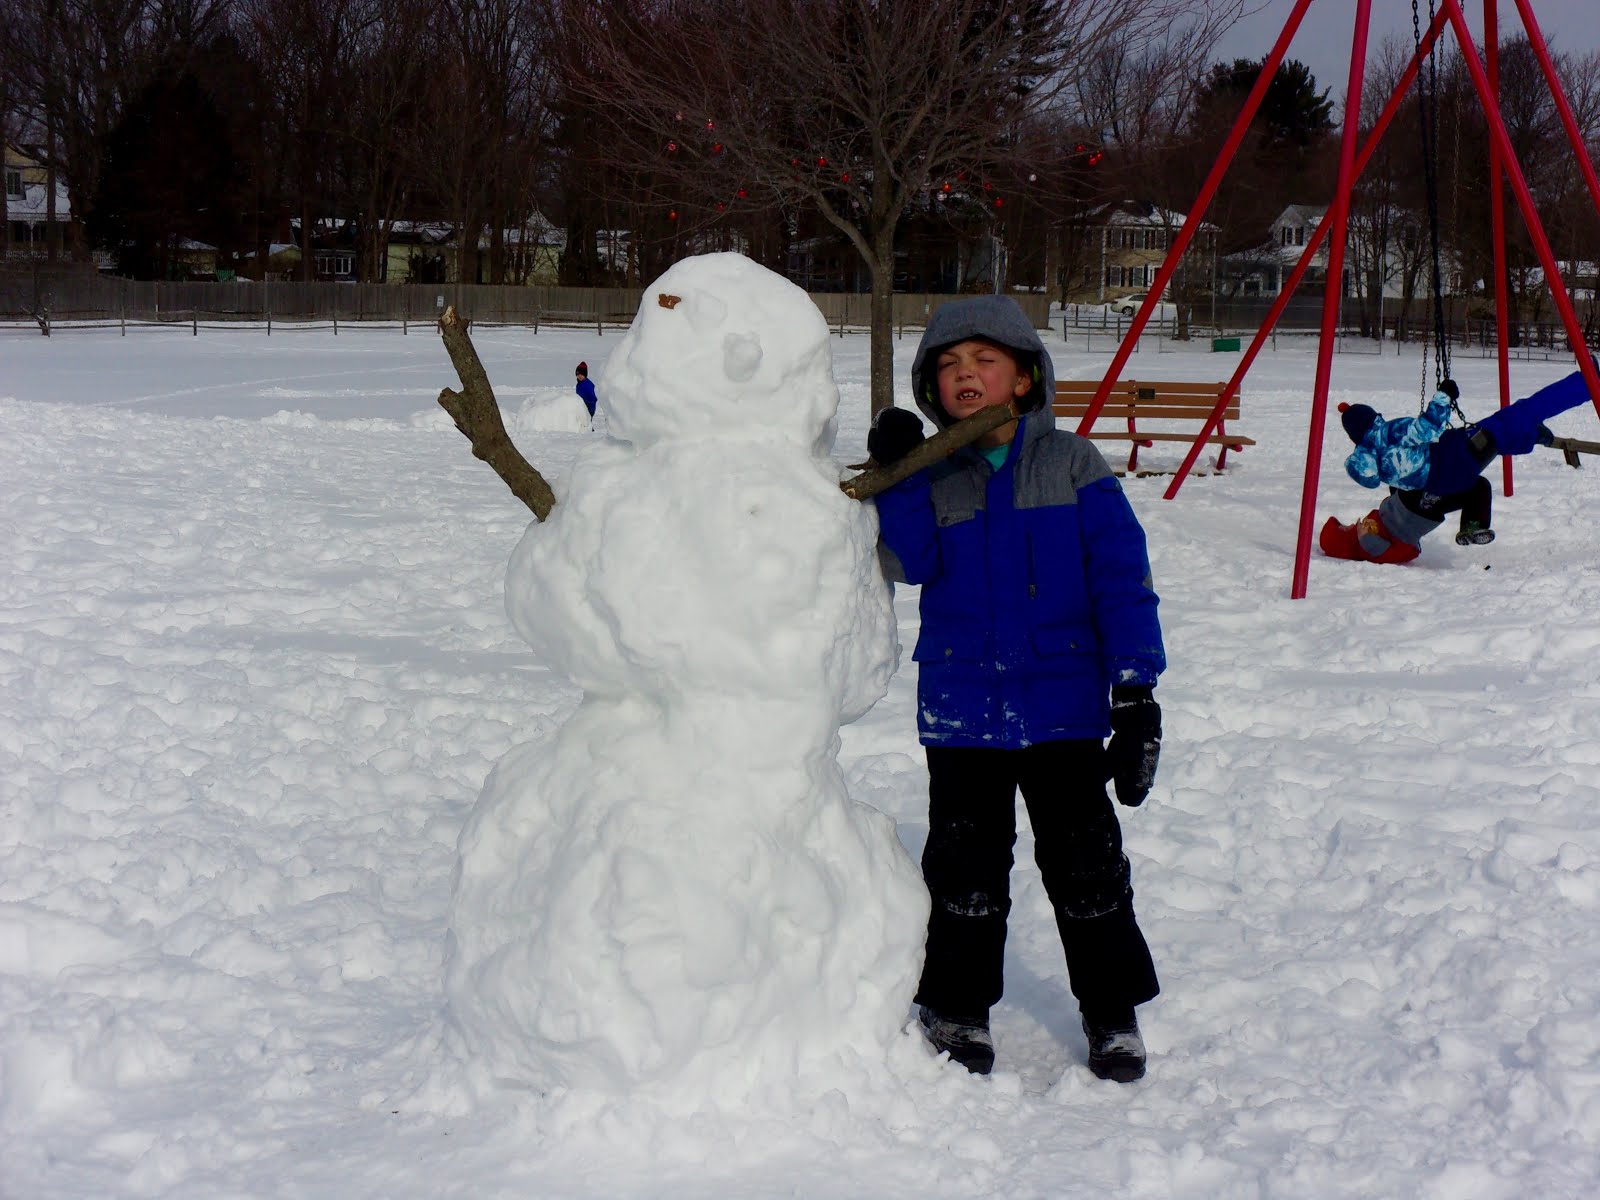 Ian and his snowman